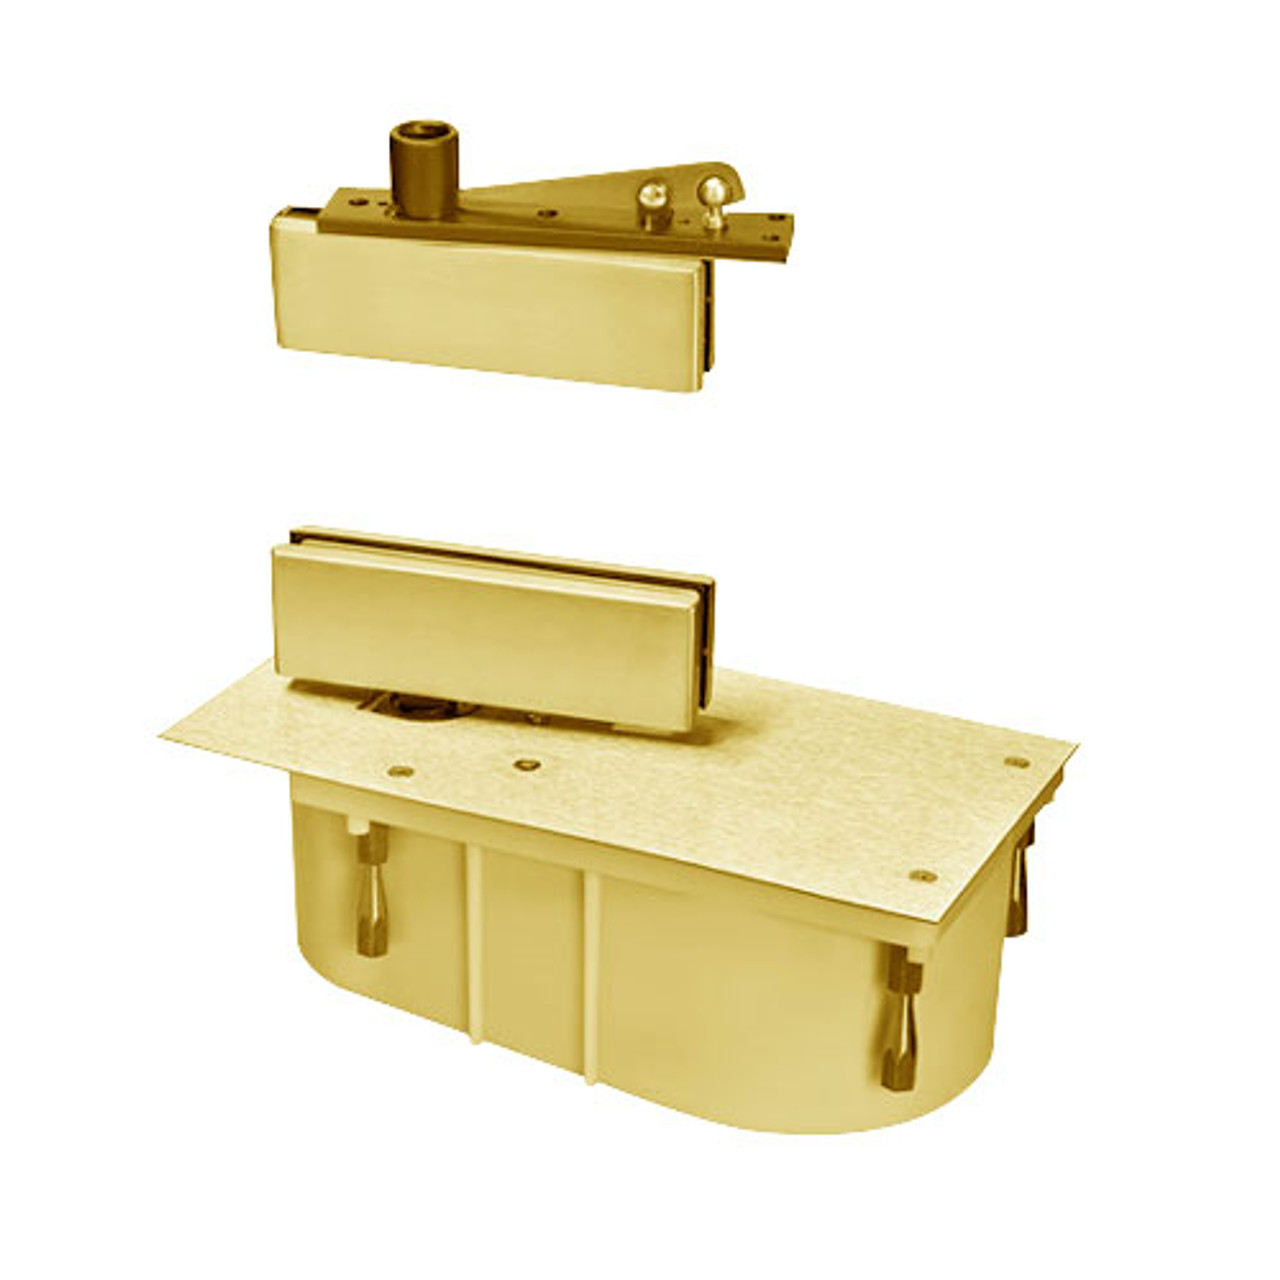 428-85N-LTP-LH-605 Rixson 428 Series Heavy Duty Single Acting Center Hung Floor Closer with Patch Fittings in Bright Brass Finish